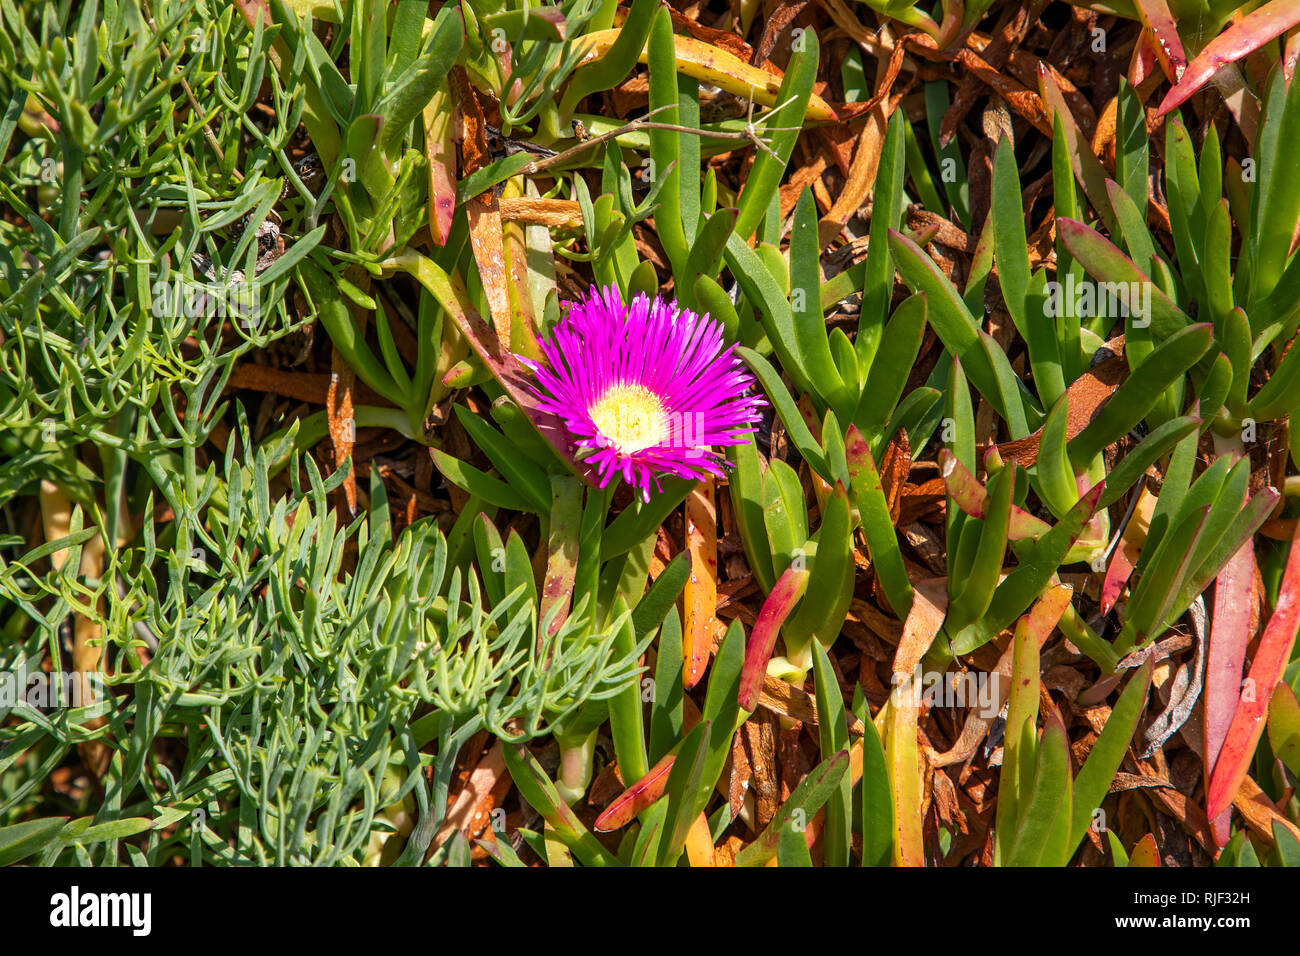 The Alderney fig plant (carpobrotus) with daisy like purple flowers in spring, it has edible fruit and is commonly known as pigface. Stock Photo